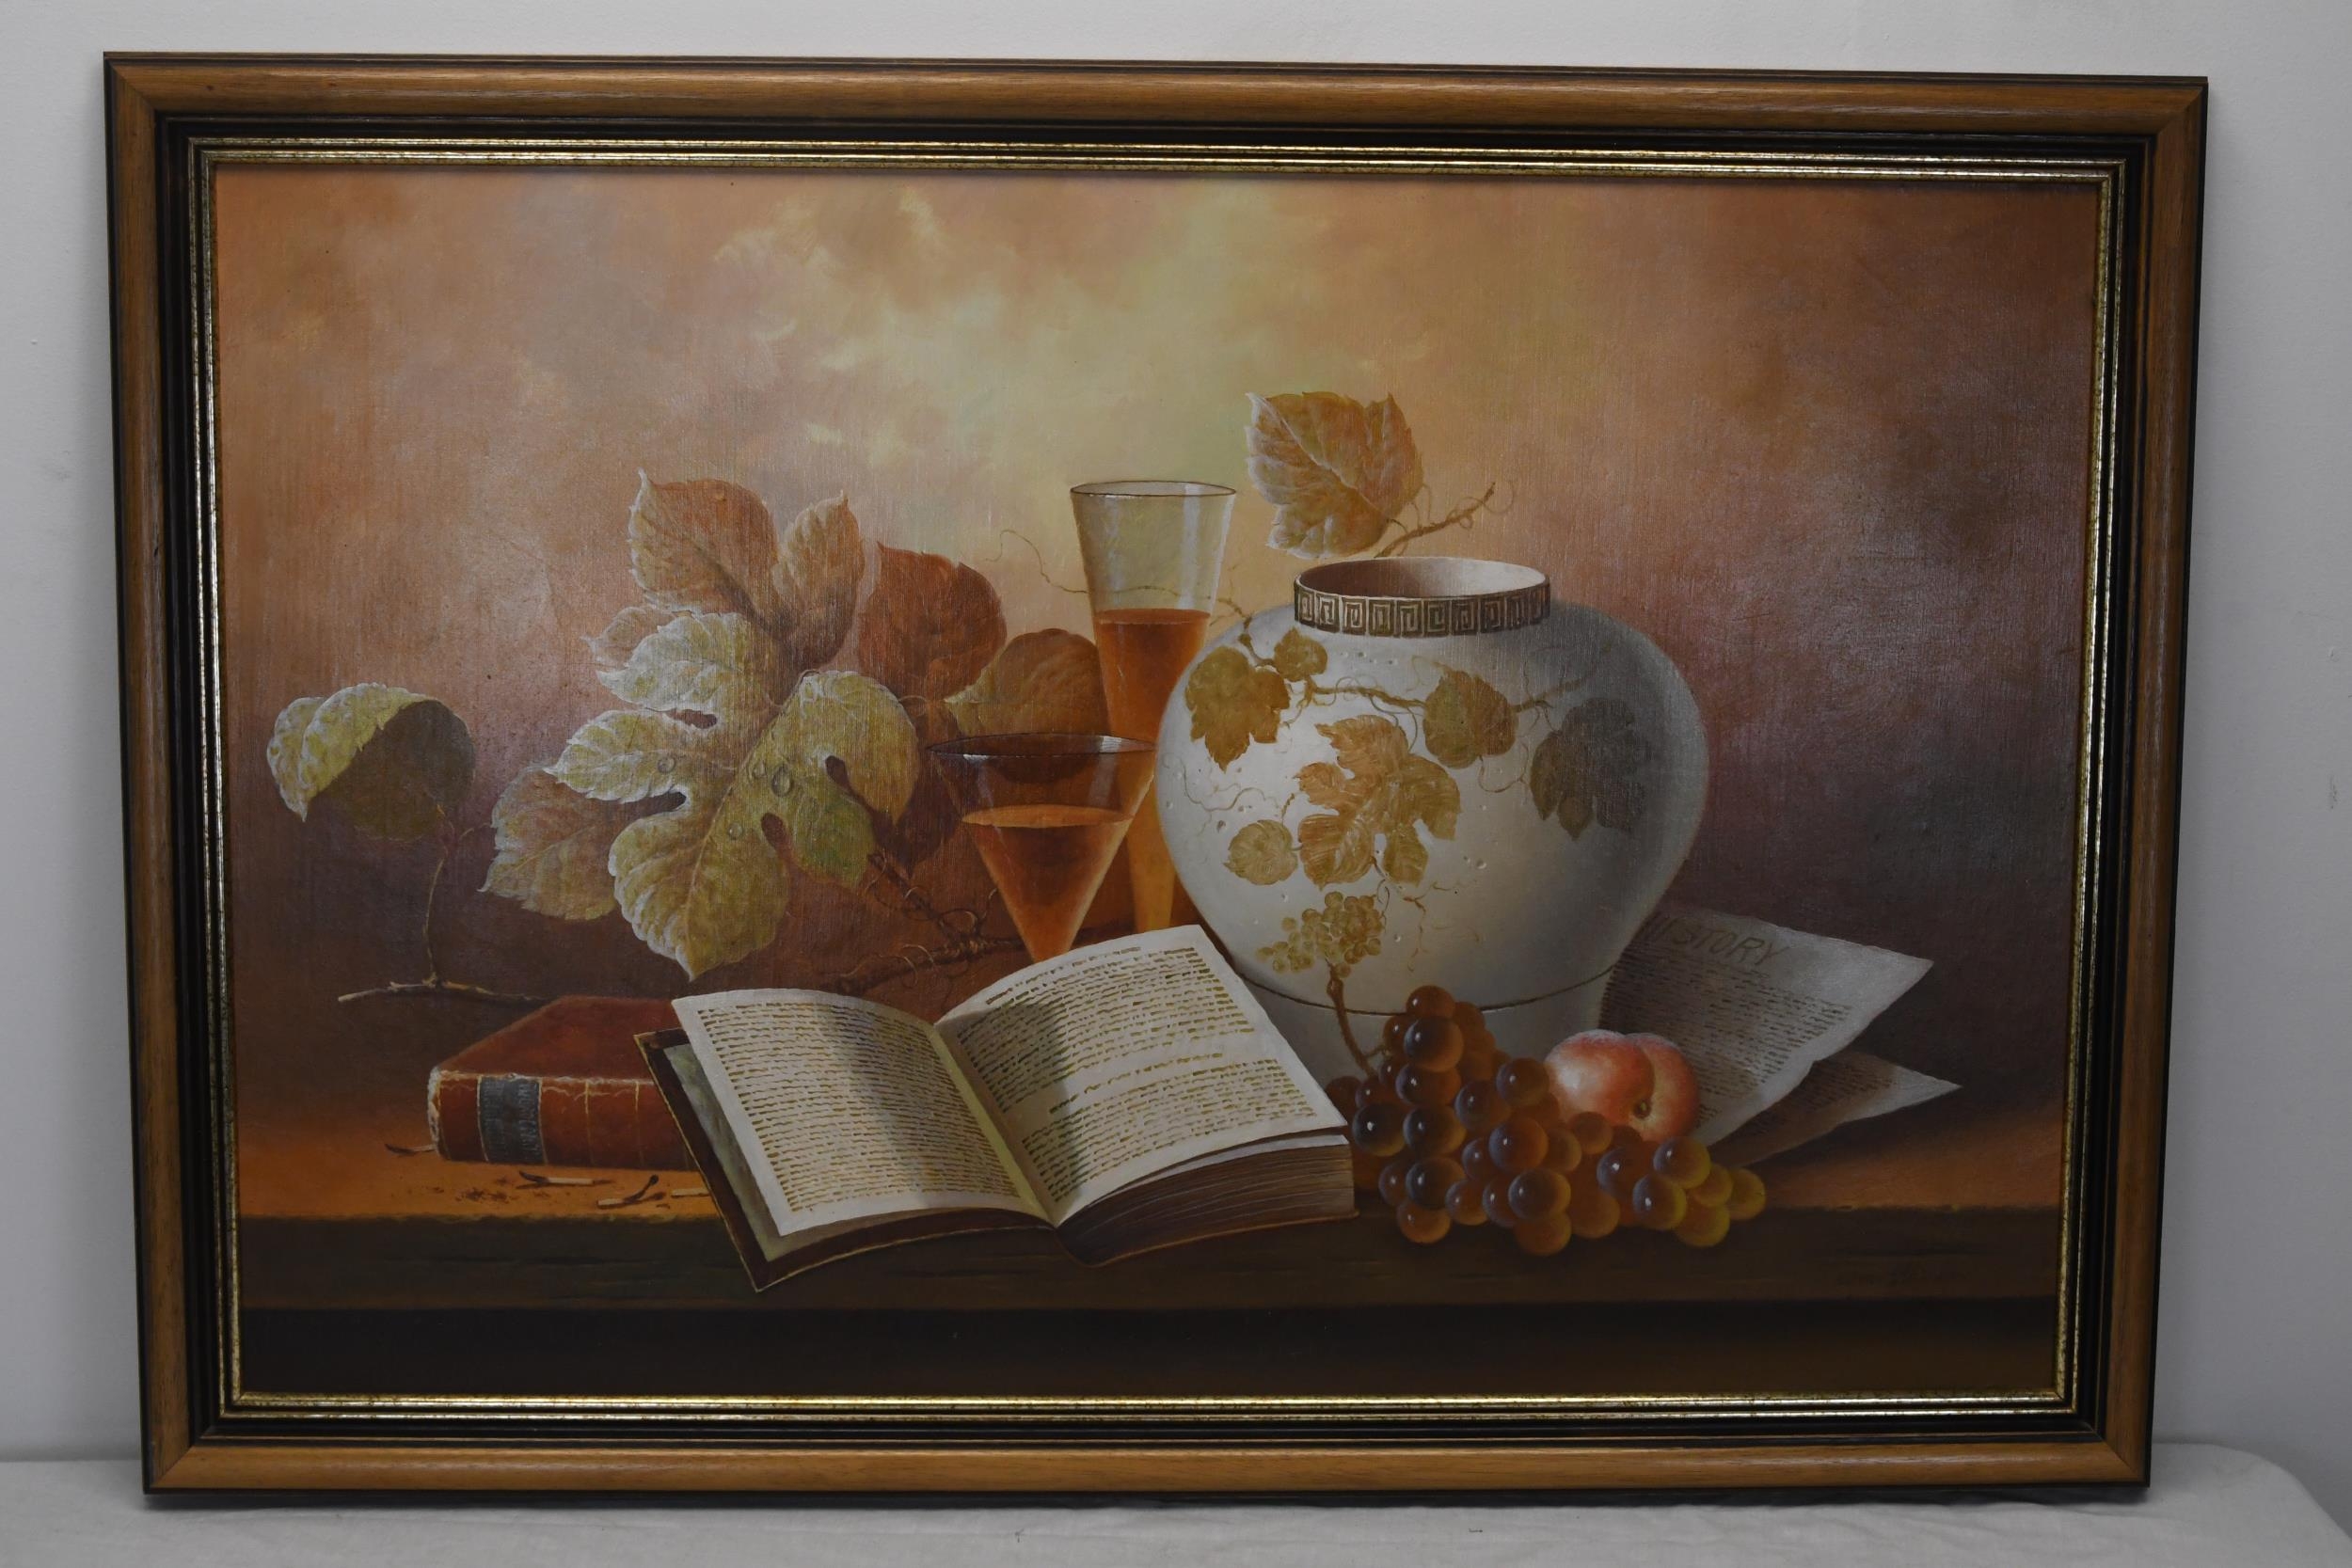 W. M. Steiner, a framed oil on canvas still life depicting an open book, a vase and fruit. Signed. - Image 2 of 4